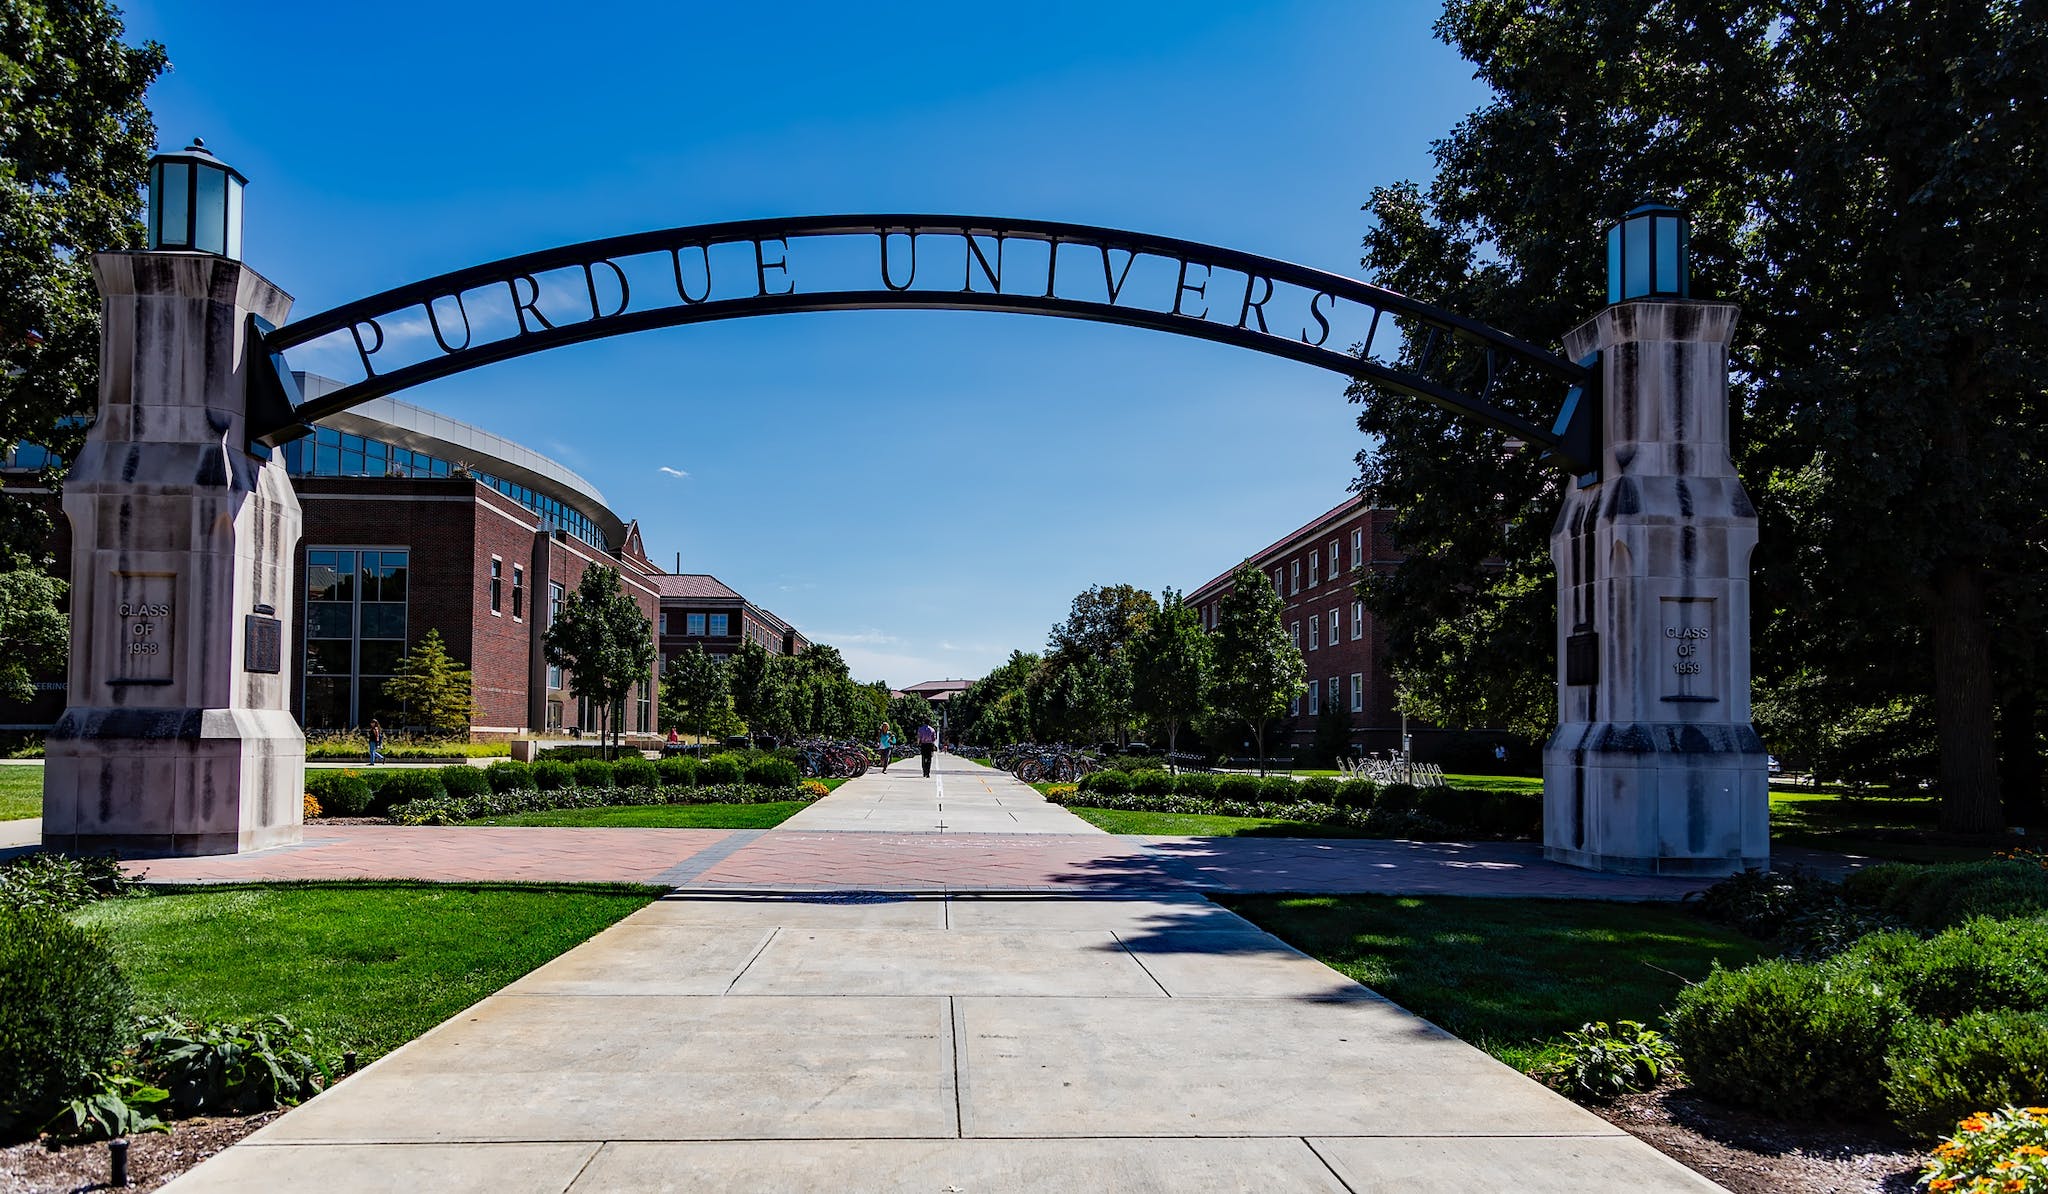 University Entrance Arch at purdue university in indiana